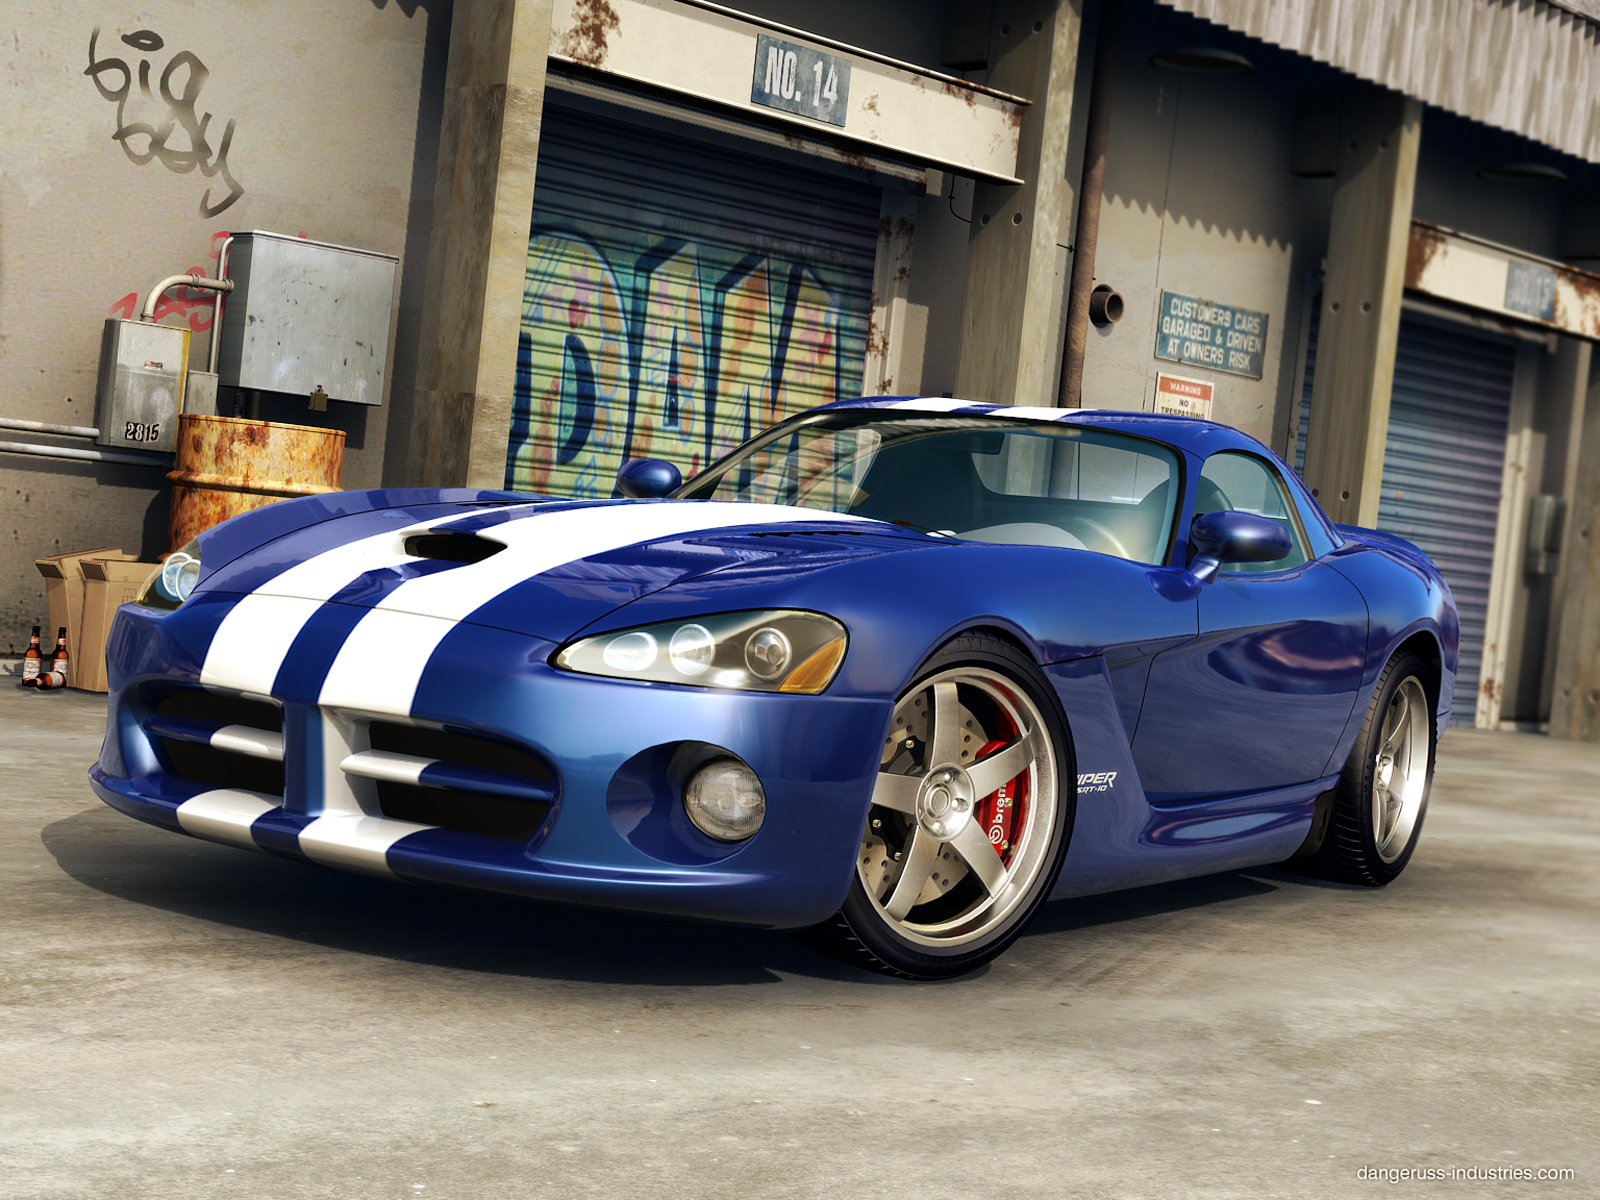 On this page we present you the most successful photo gallery of Dodge Viper